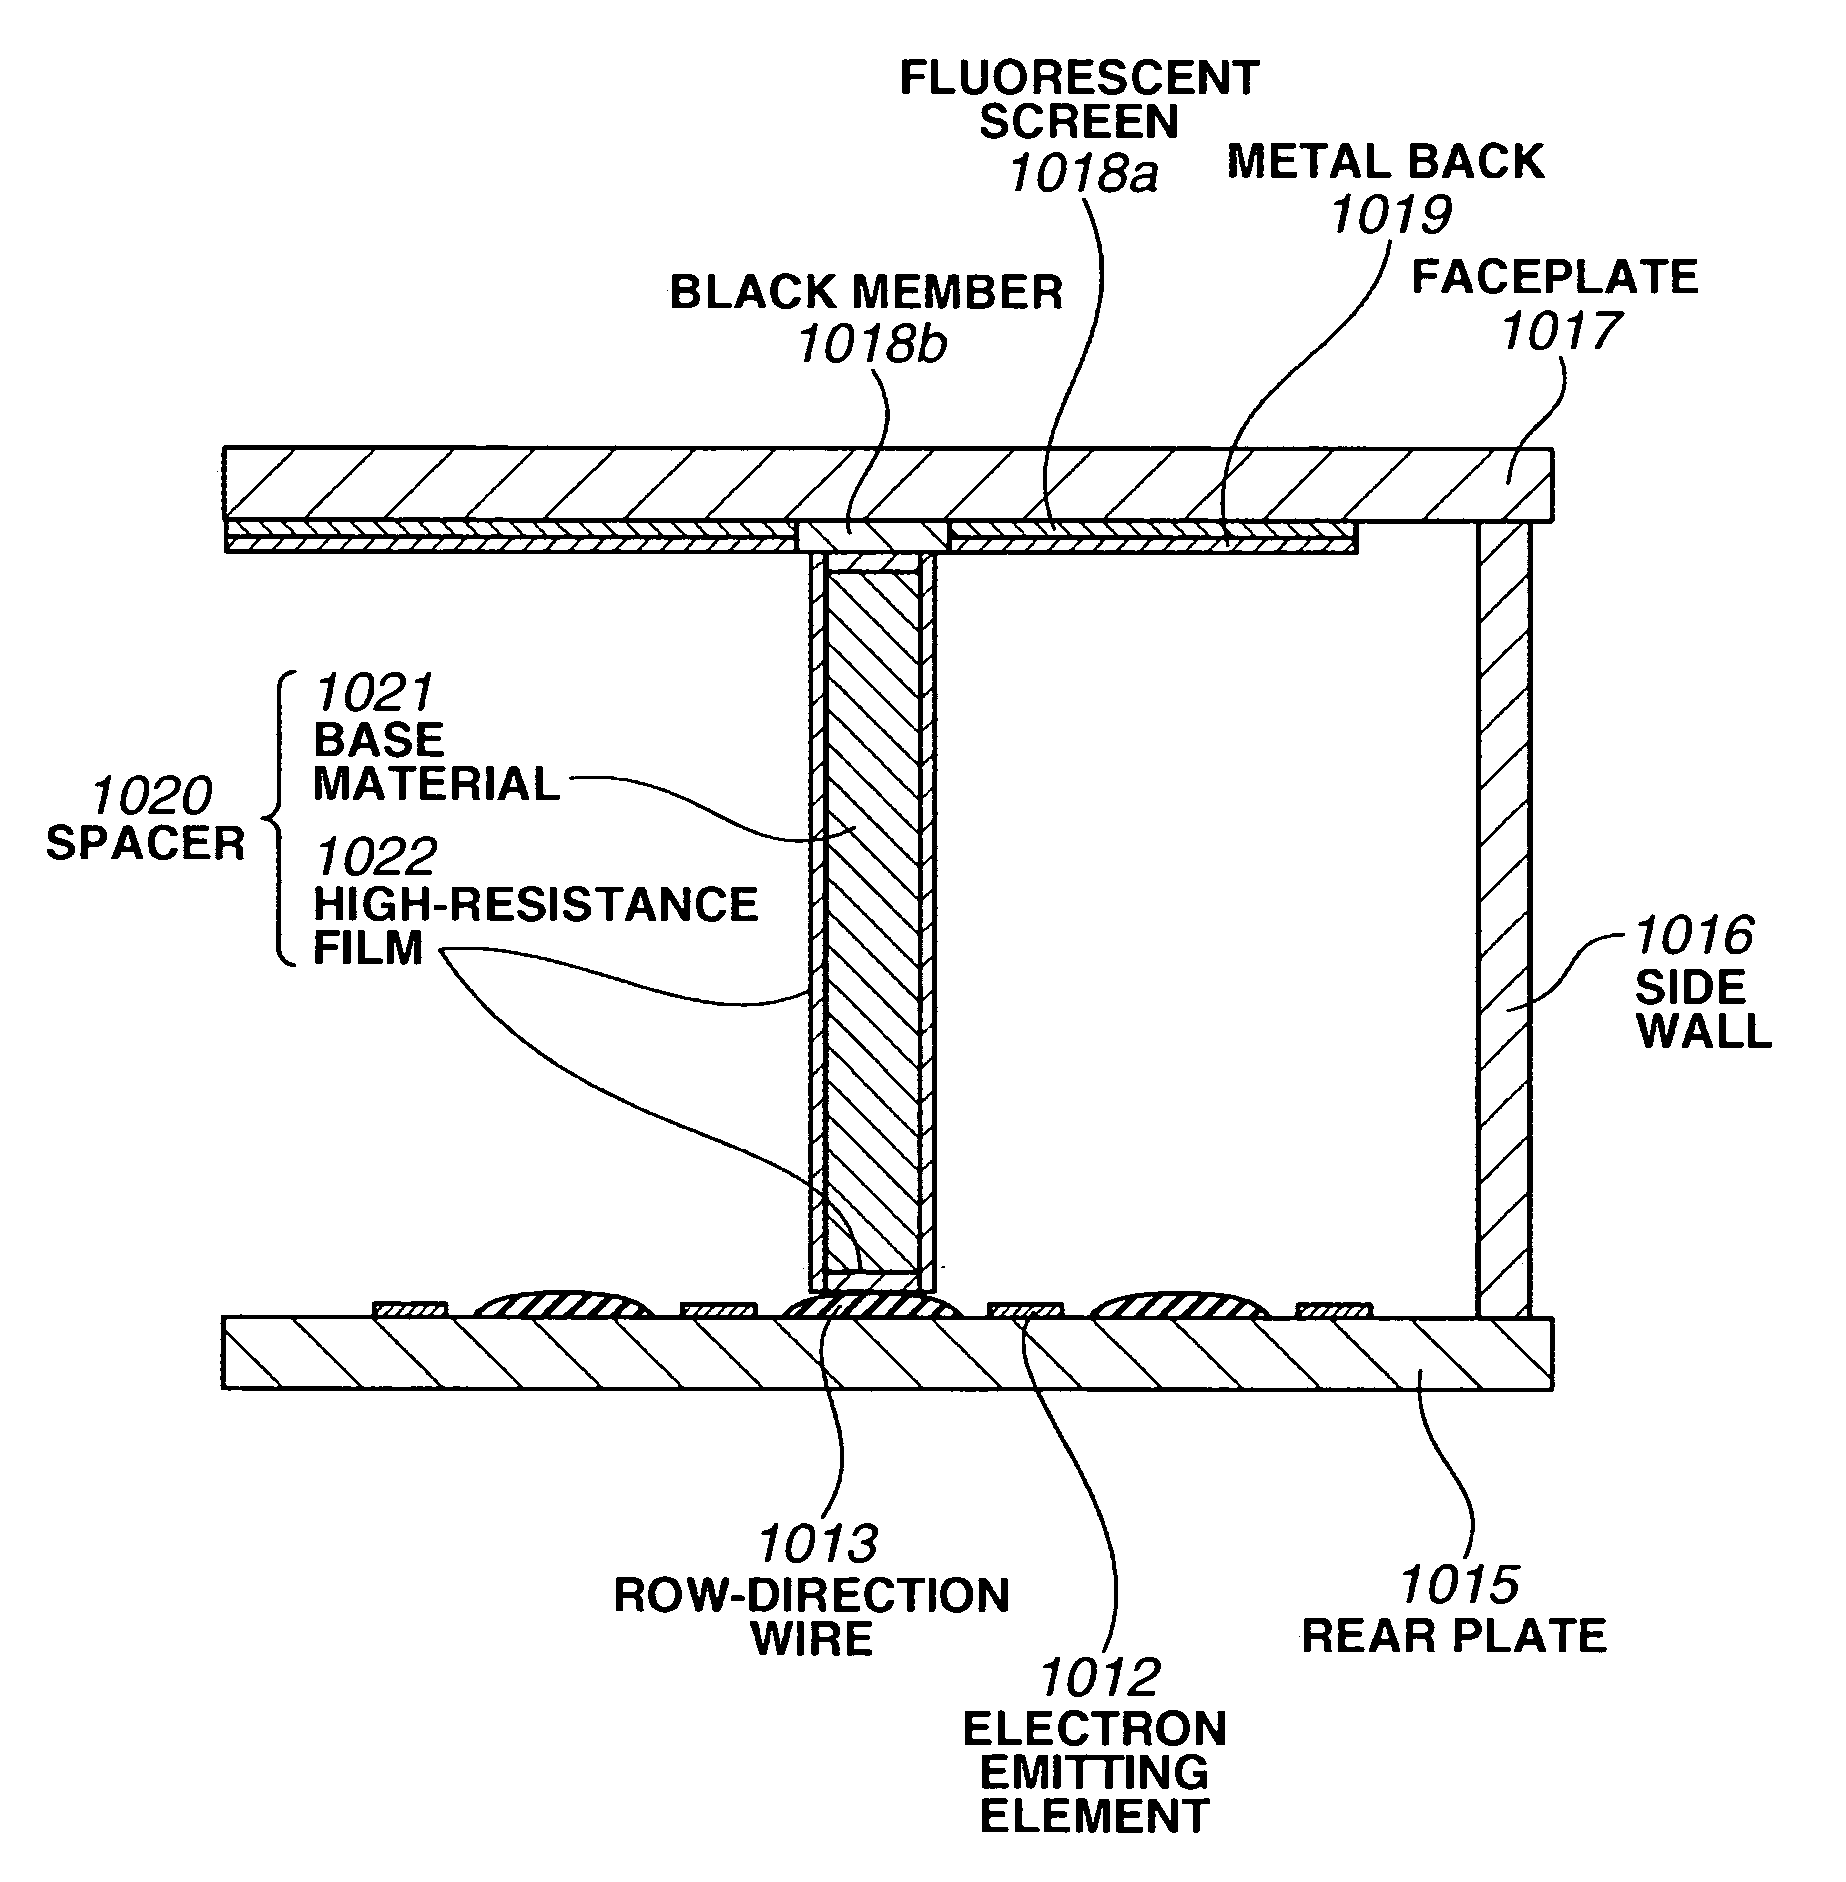 Electron beam apparatus, having a spacer with a high-resistance film